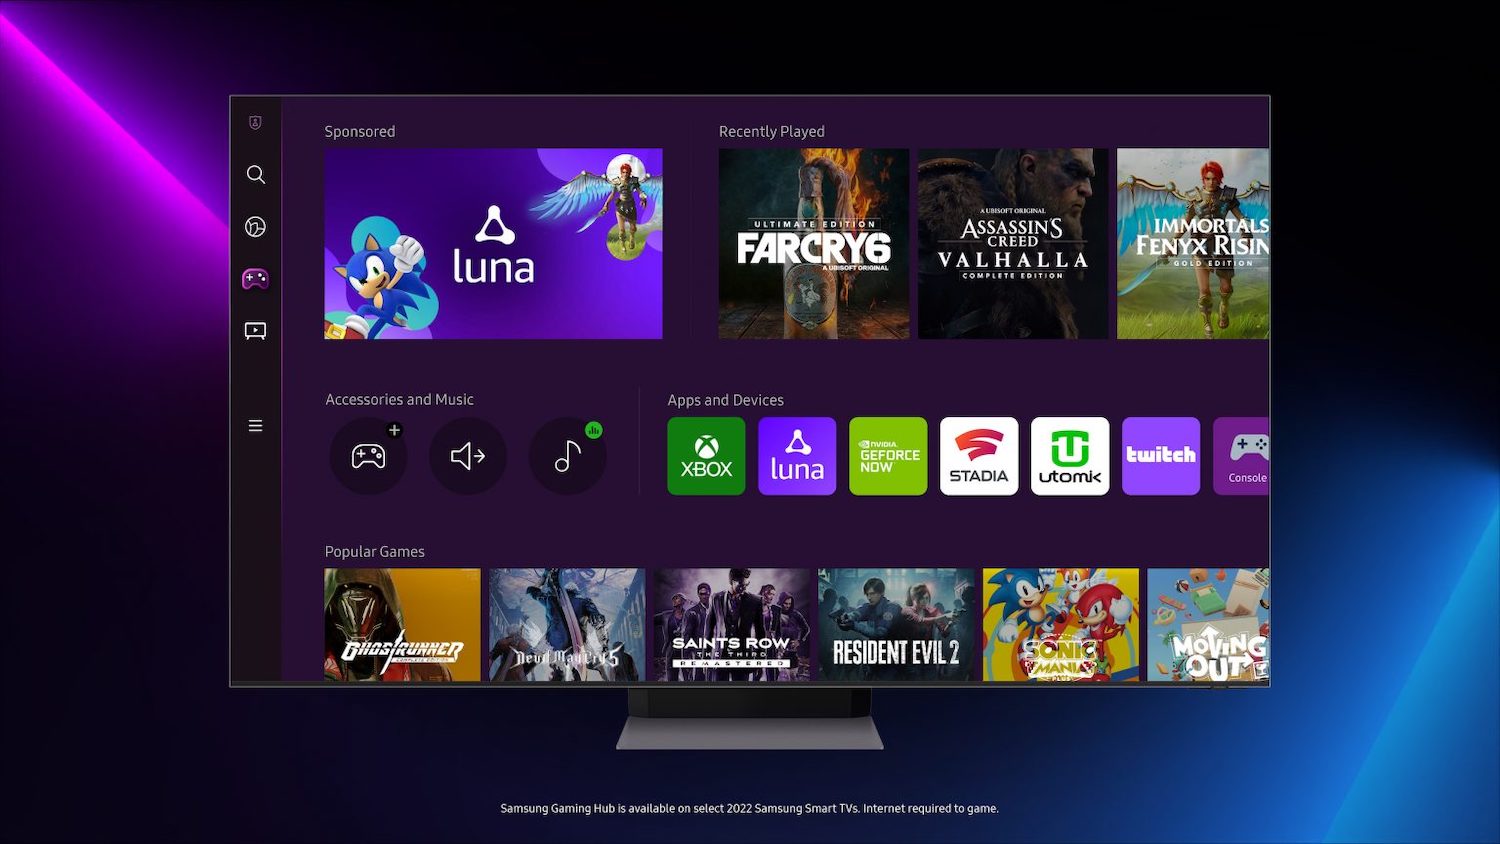 Game Pass Is Coming to GeForce NOW, Albeit with Select Games